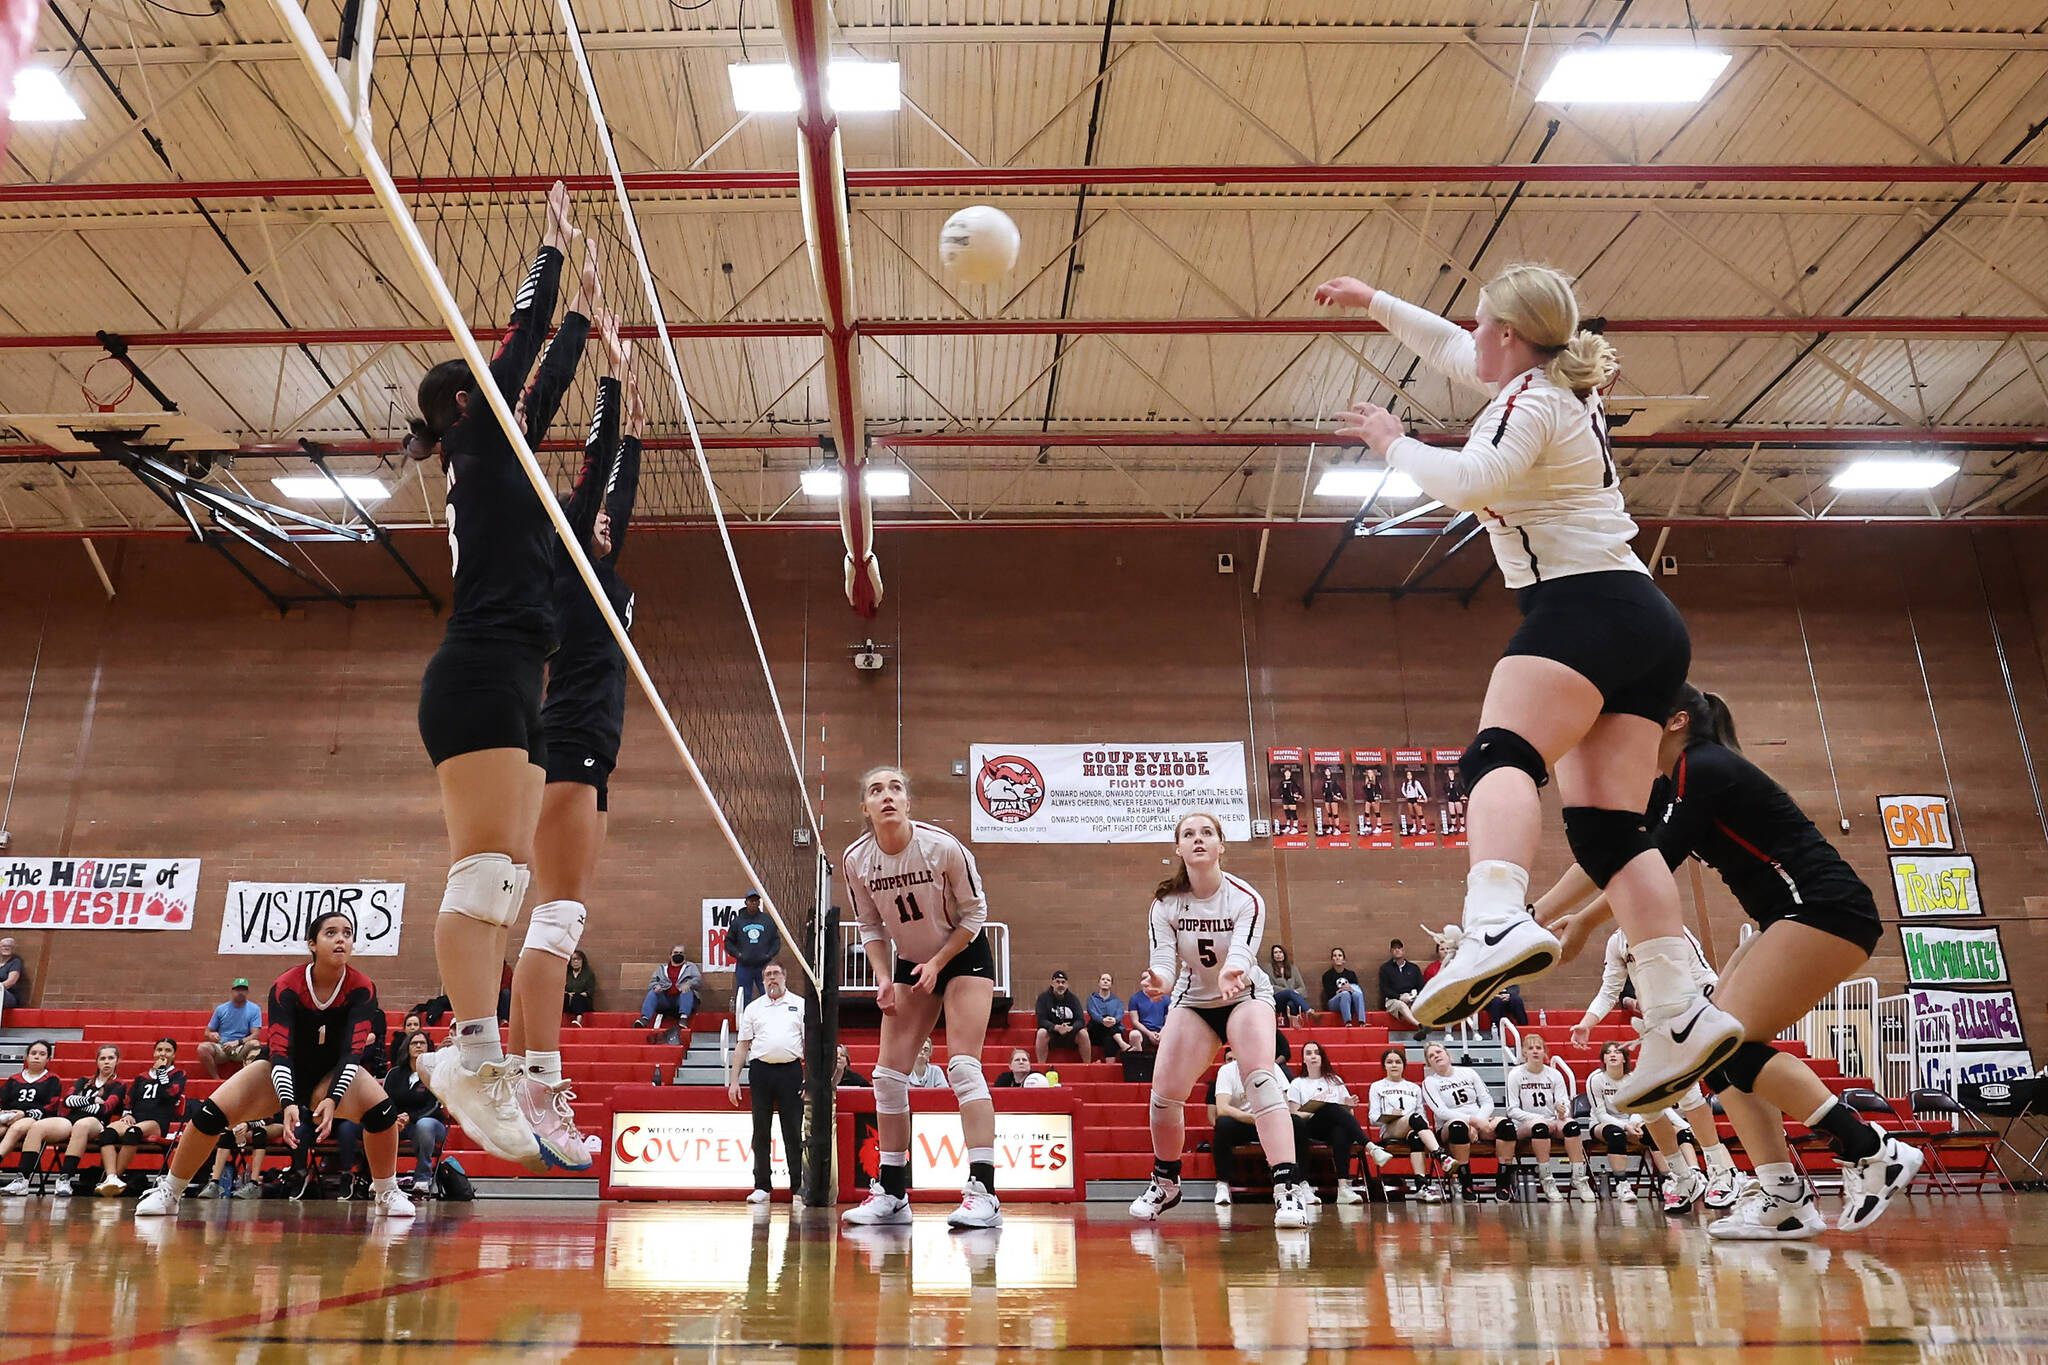 Photo by John Fisken
Volleyballers take to the air in the Oct. 15 match between Coupeville and Neah Bay.